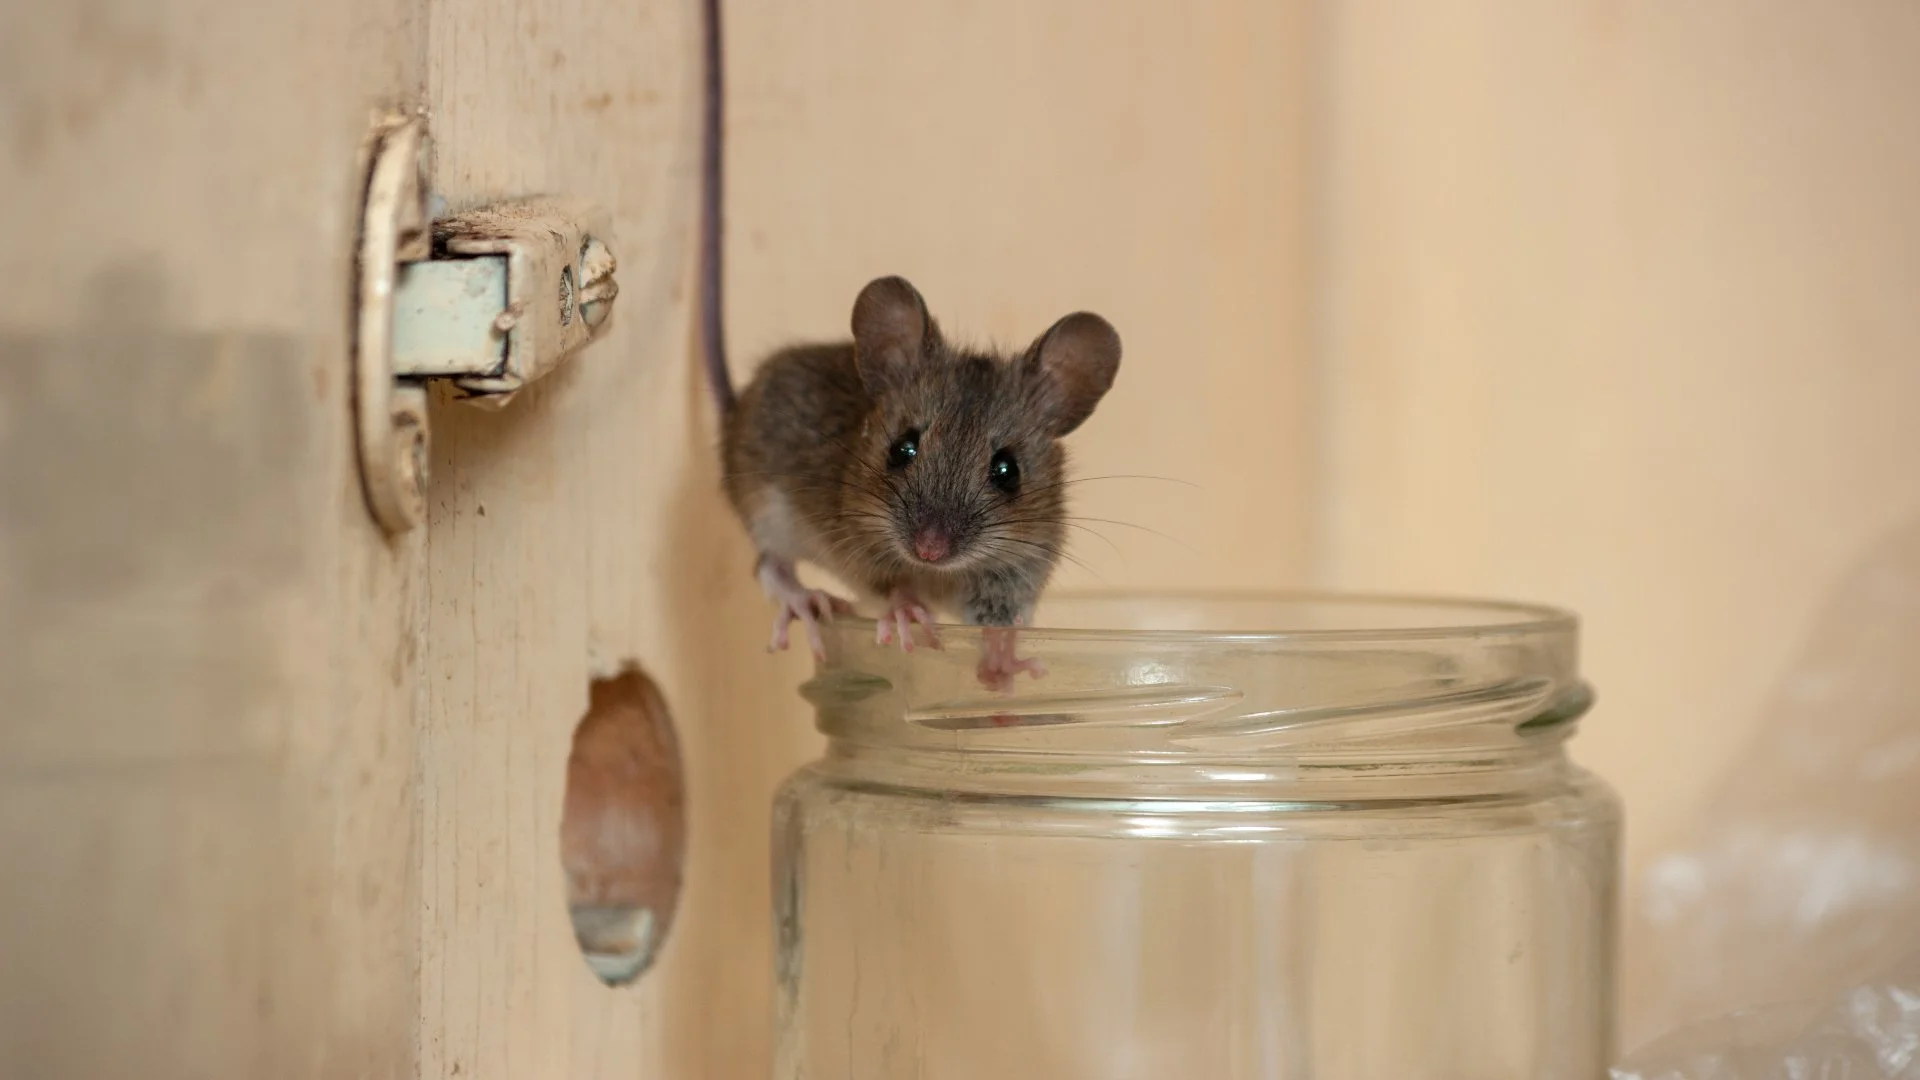 How Do I Get Rid of the Mice in My Home?